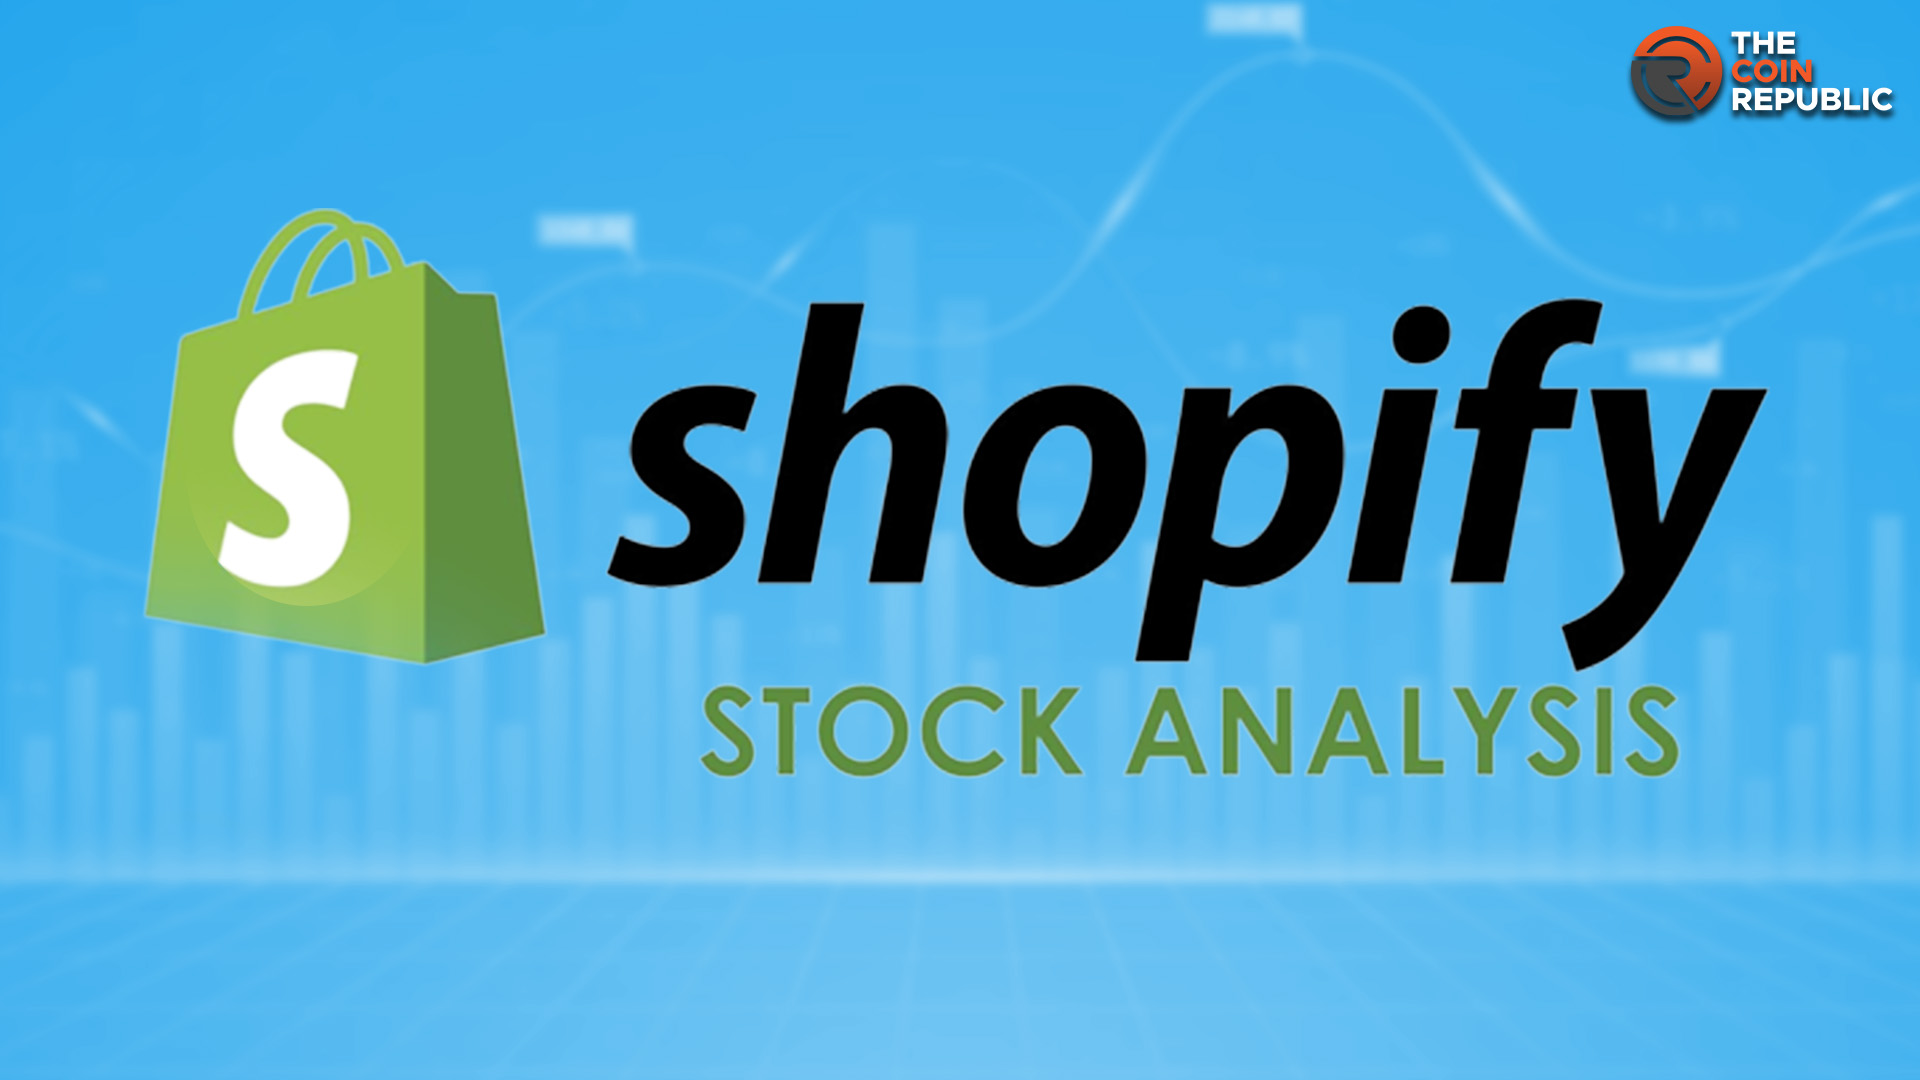 SHOP Stock: the Key Factors That Will Hurt Shopify Price in 2023